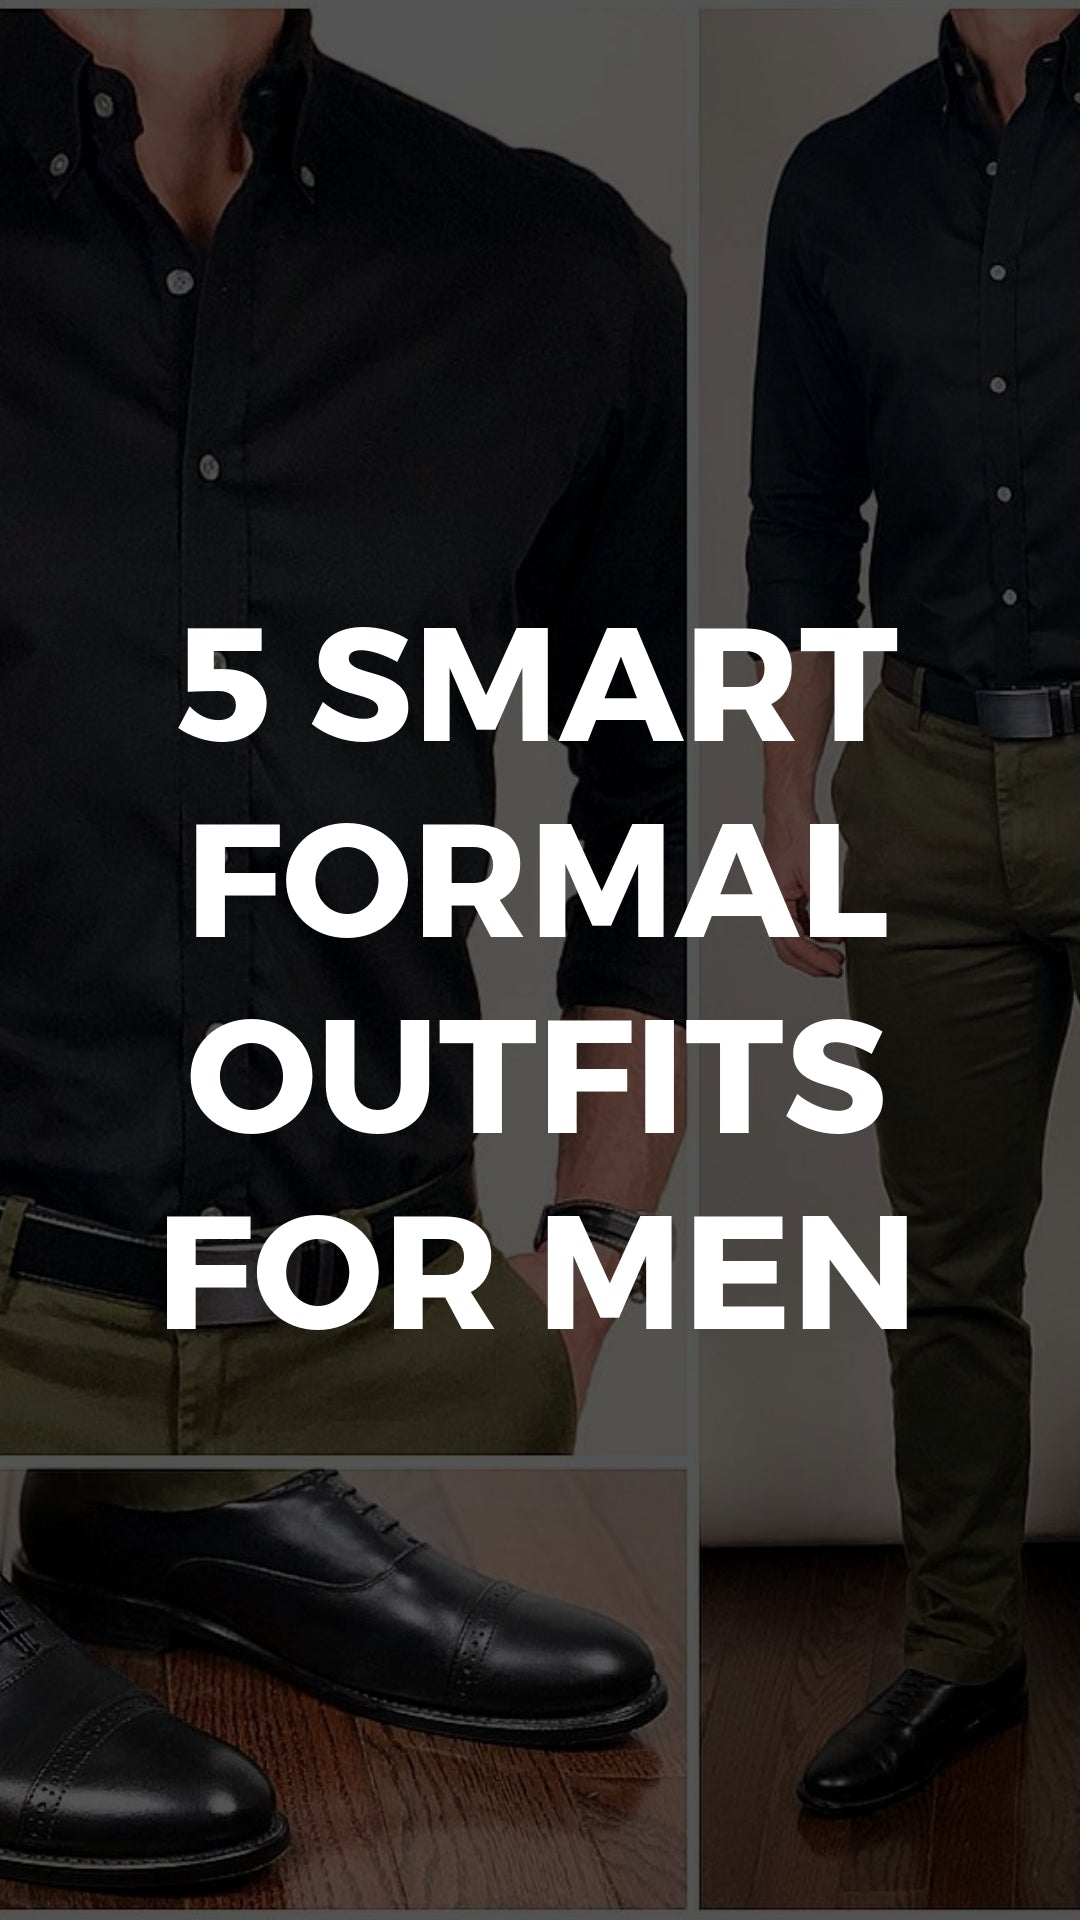 Formal outfits for men. #formal #outfits #mensfashion #fashiontips